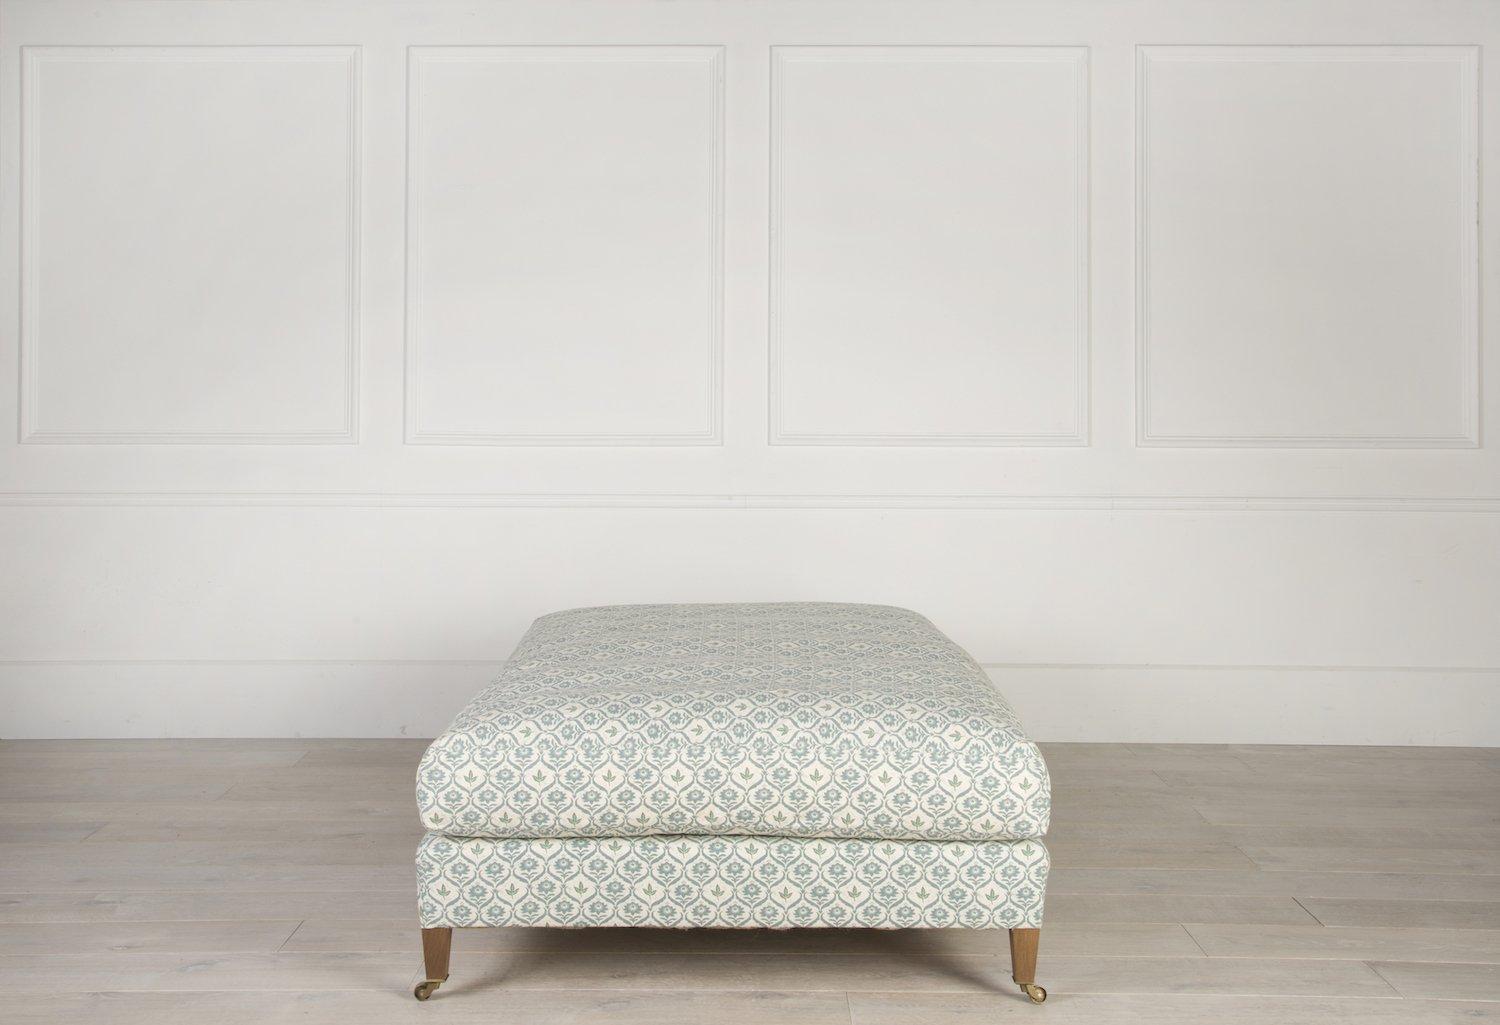 Made to Order from our Lorfords Contemporary collection - The Albany is a large country house ottoman, featuring a generous feather and down filled cushion. The Albany has extra pockets within the cushion, to contain the movement, keeping it